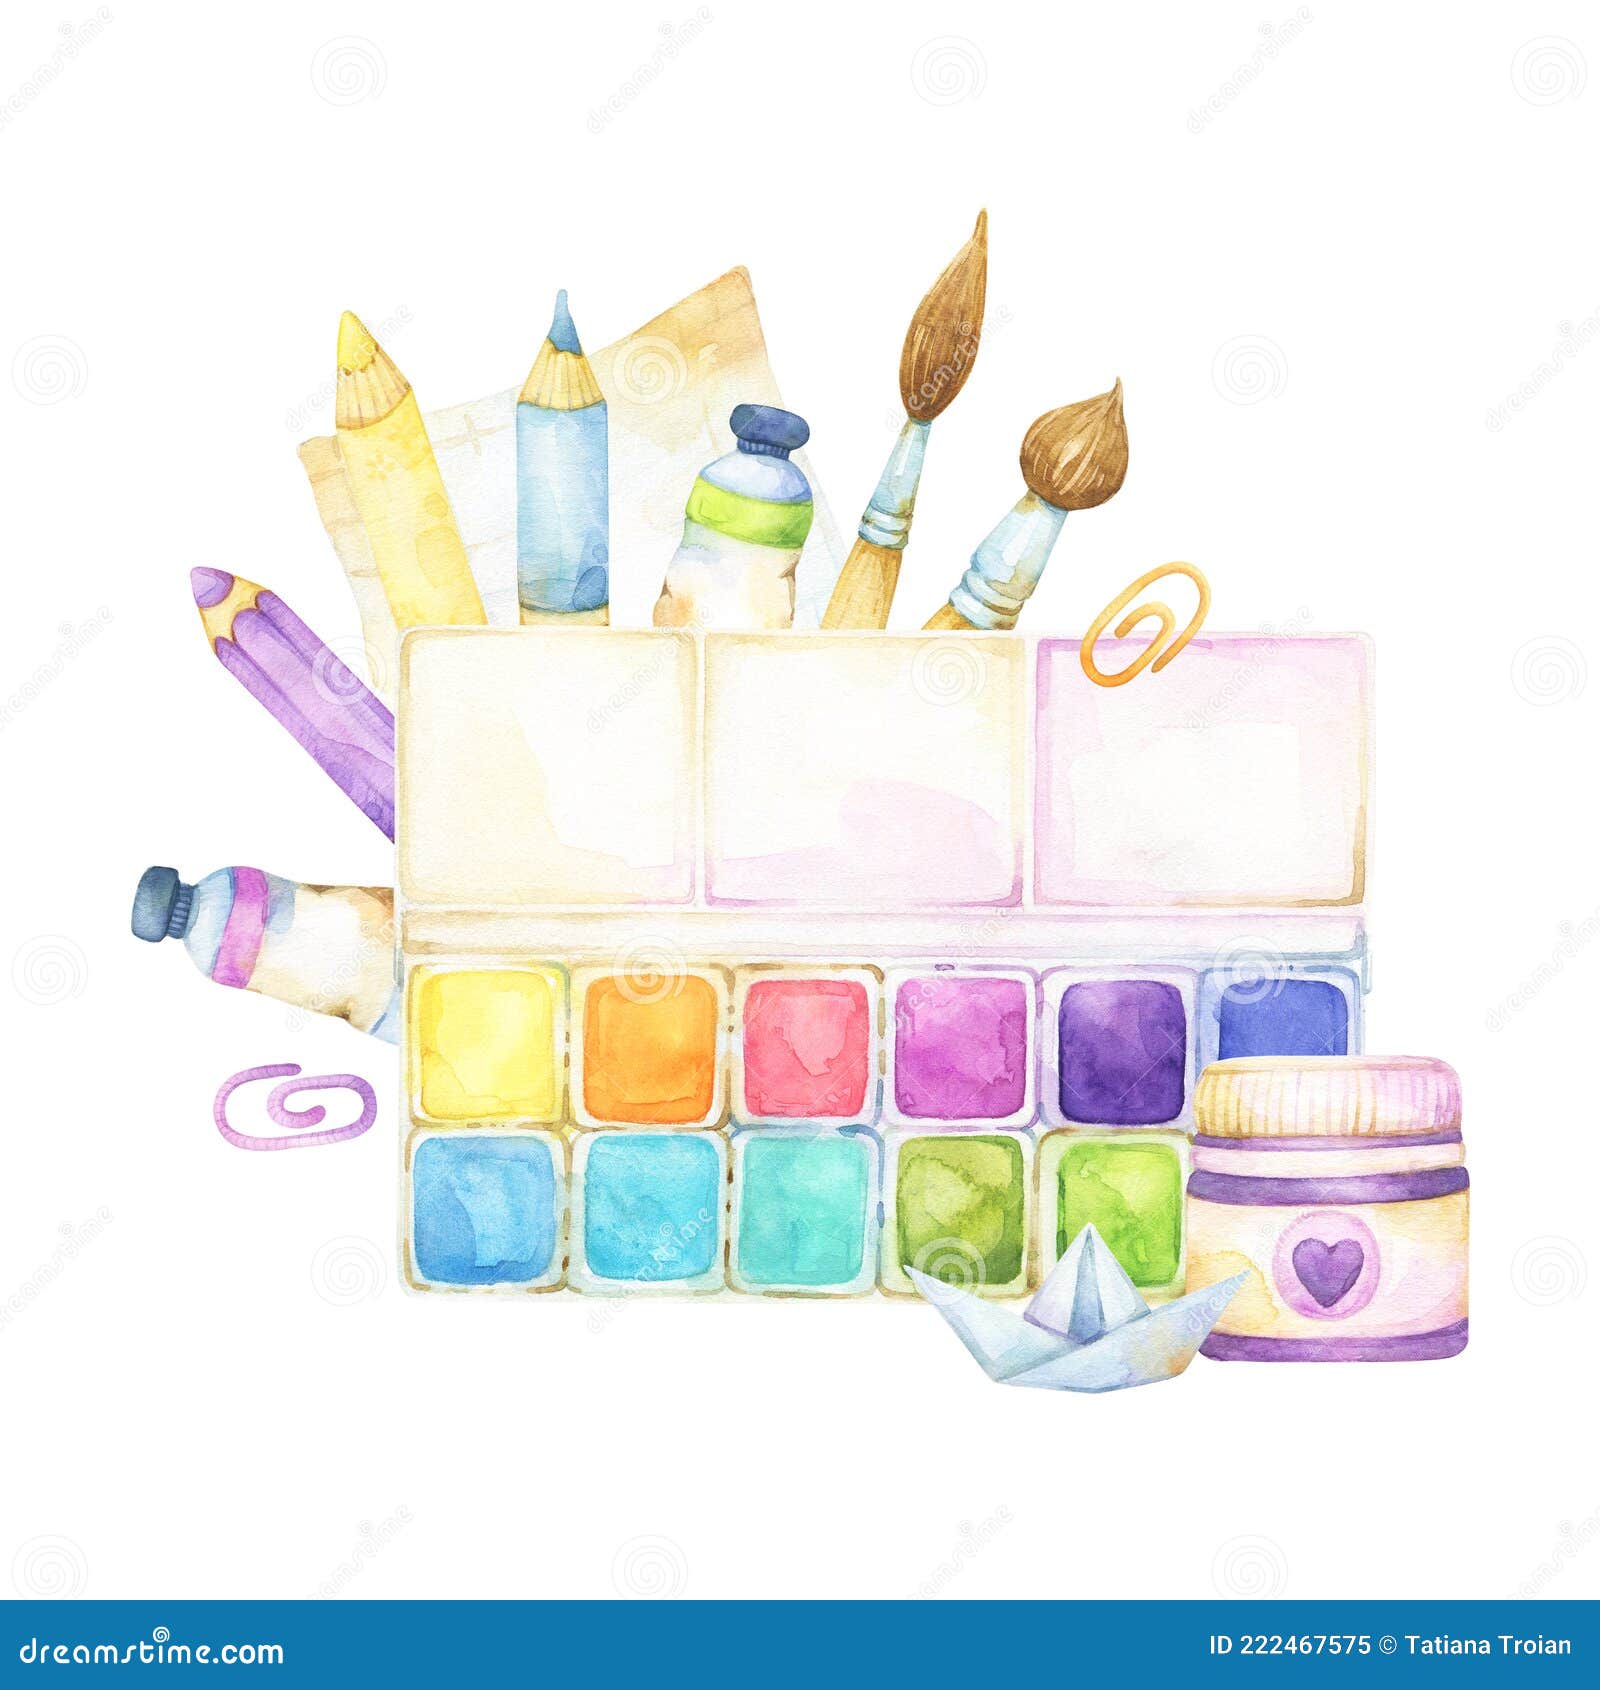 https://thumbs.dreamstime.com/z/premade-design-watercolor-clipart-isolated-white-background-including-arts-crafts-school-supplies-such-as-paint-palet-222467575.jpg